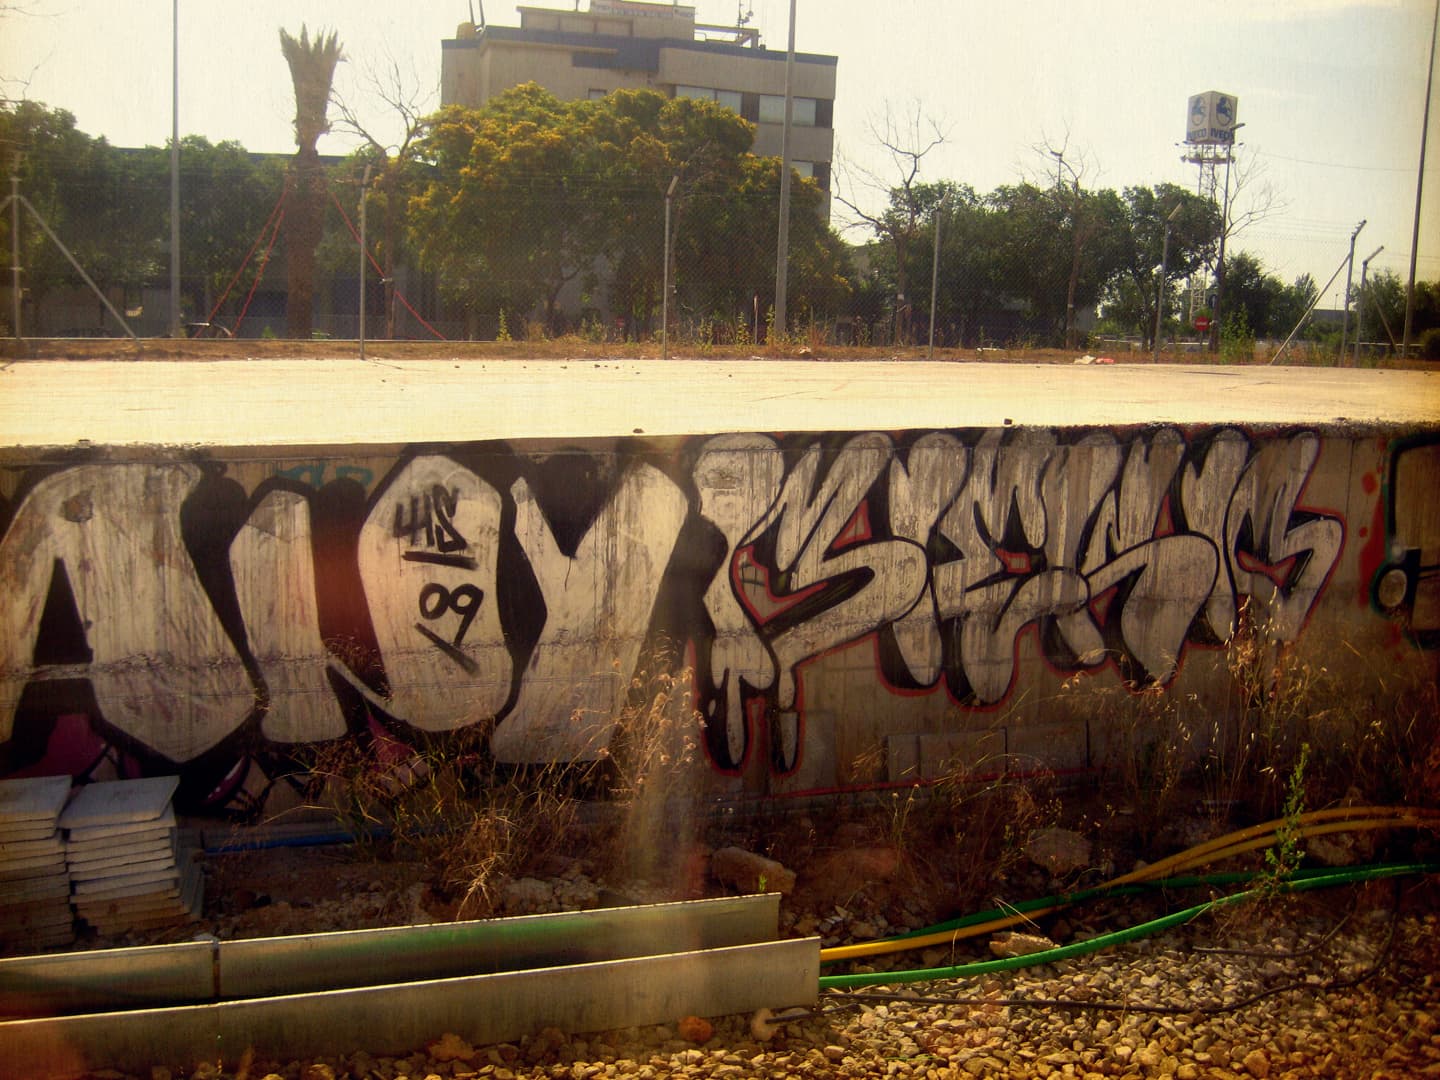 Graffiti tag on a wall surrounded by an urban landscape